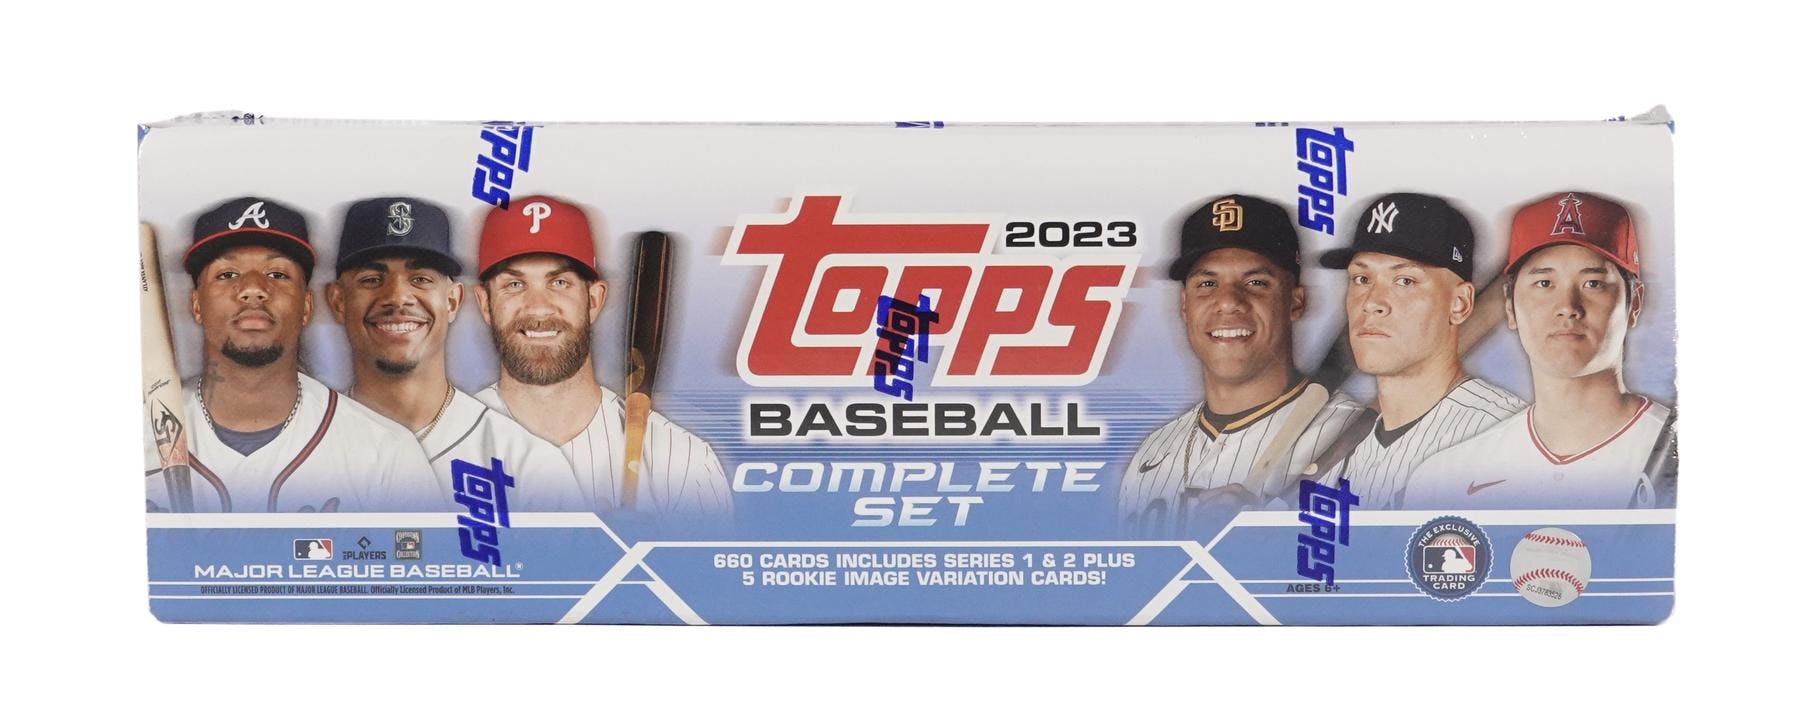 2023 Topps Baseball Retail Factory Set Variations Guide, Gallery